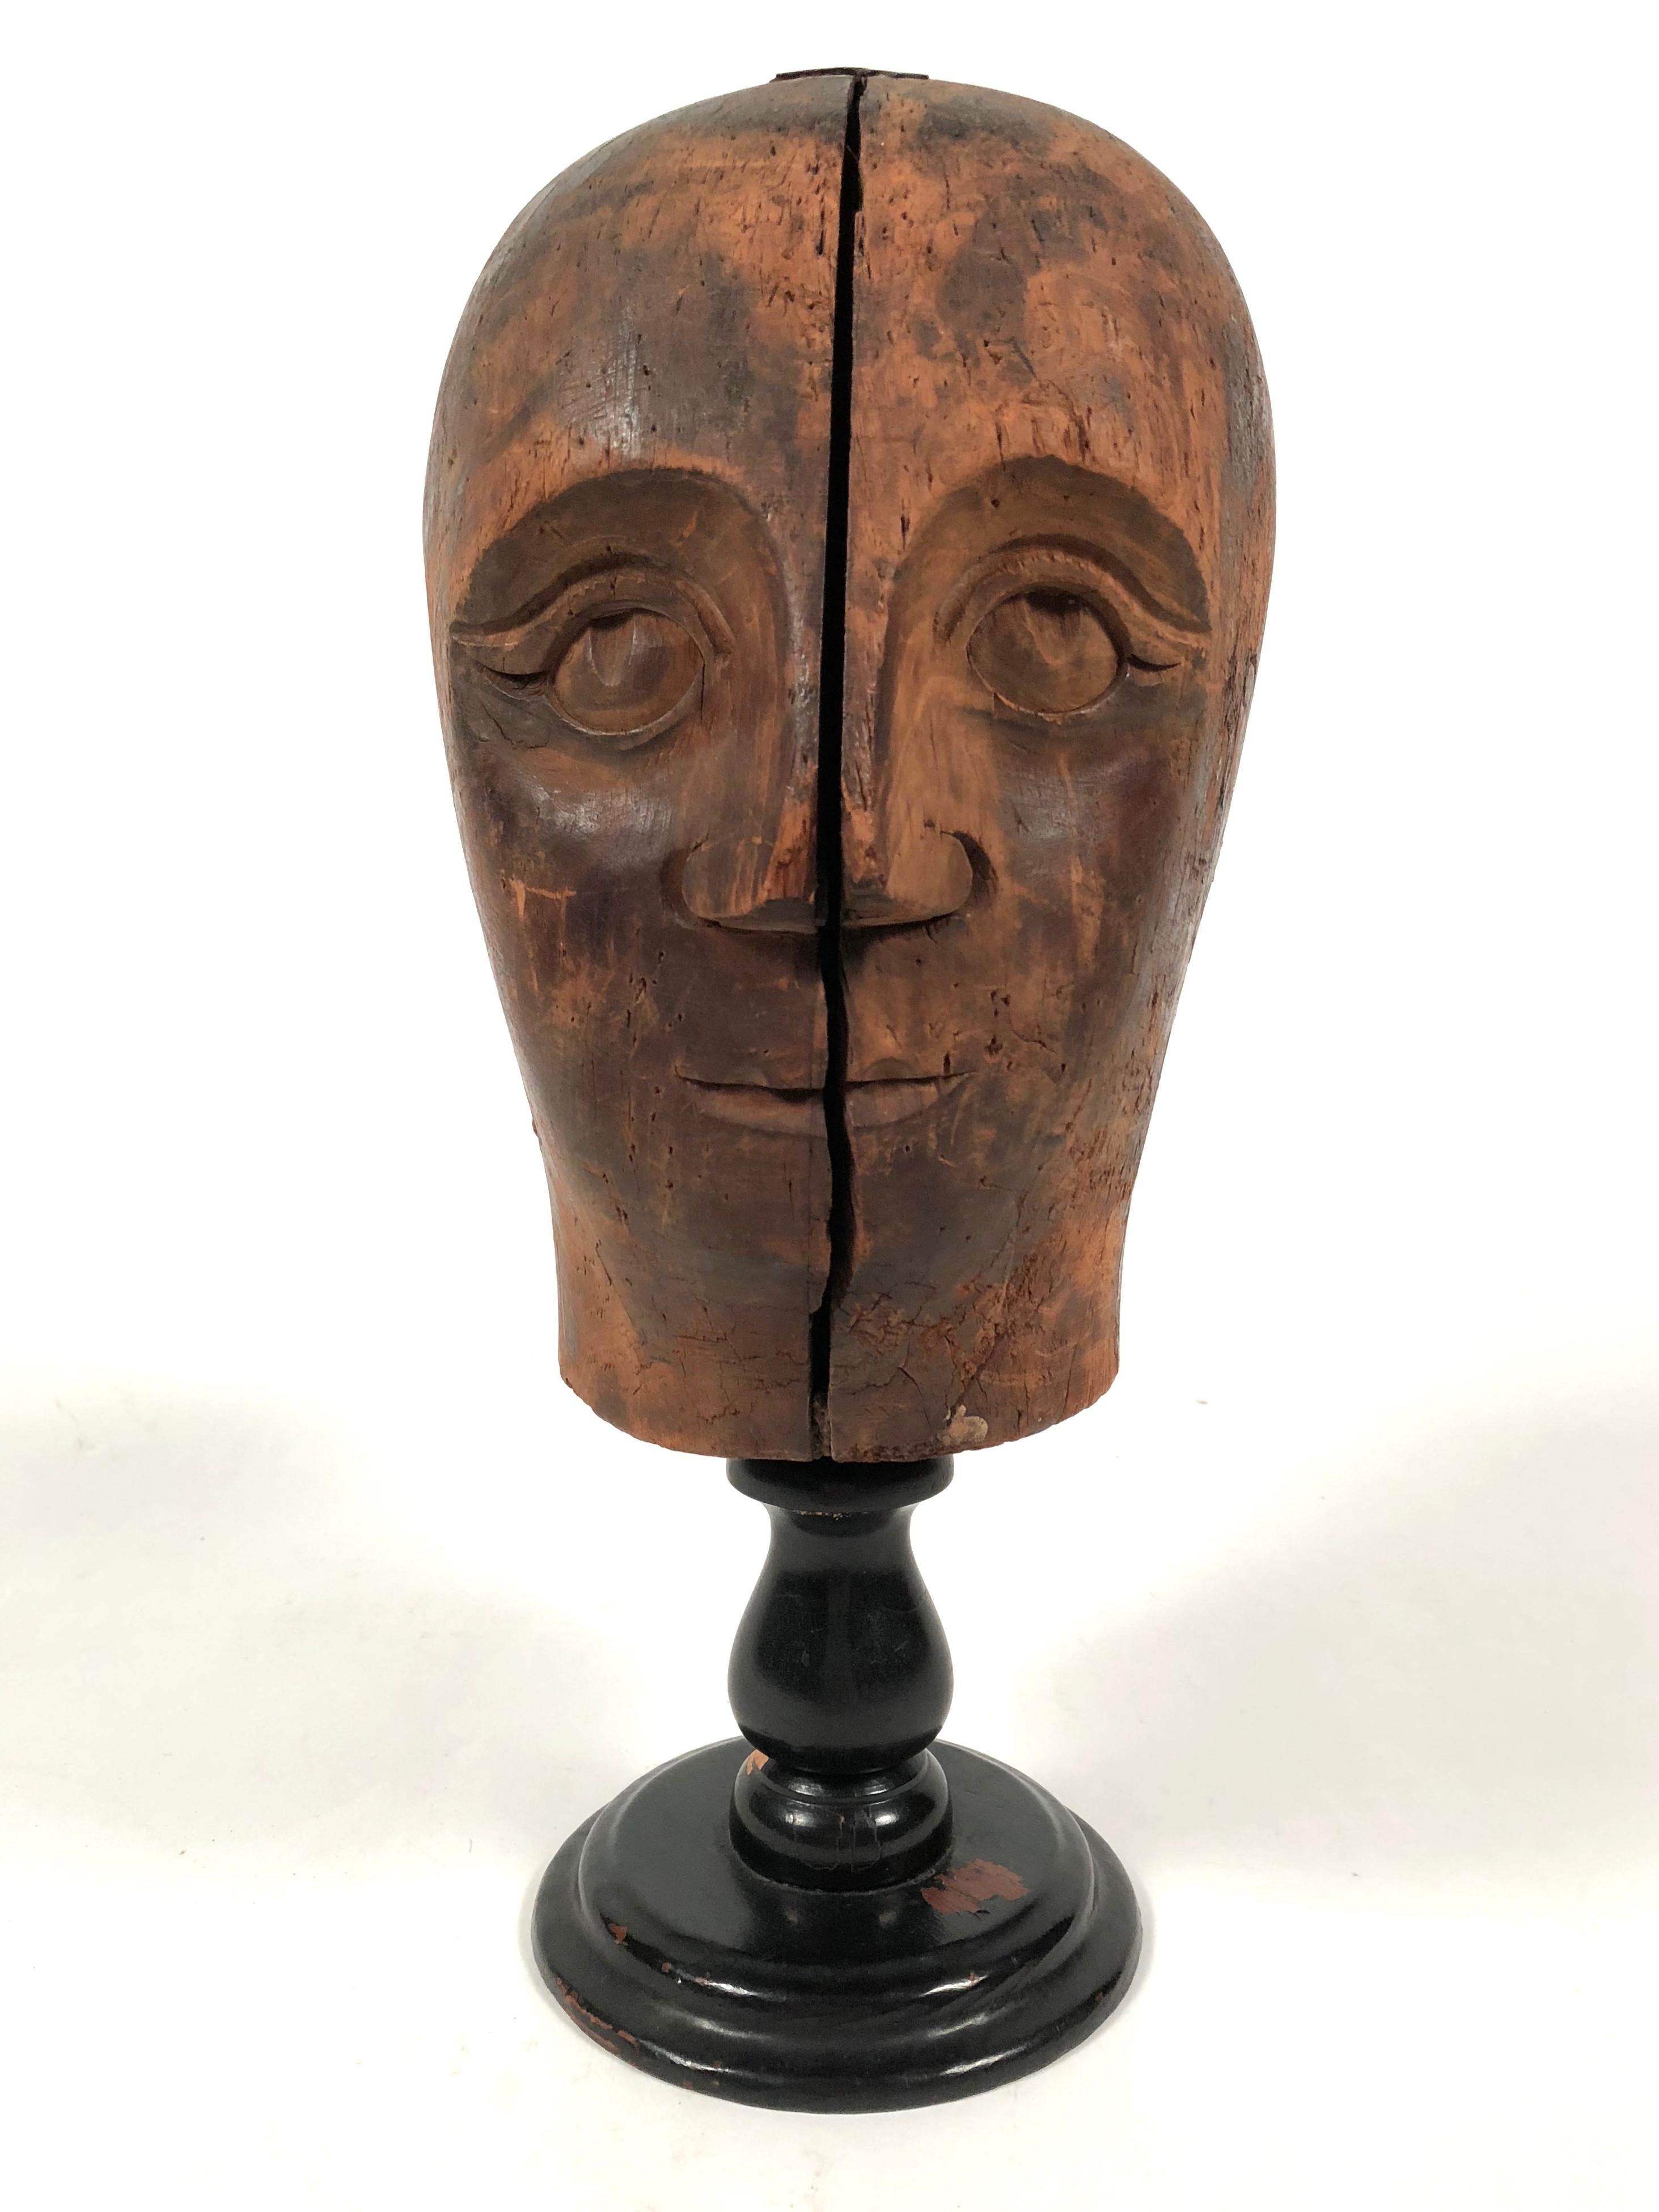 A 19th century Folk Art carved wooden head of a man, likely a hat display form 19th century, carved from two joined wooden segments, with well delineated facial features. Mounted on a black painted turned wooden stand.

 